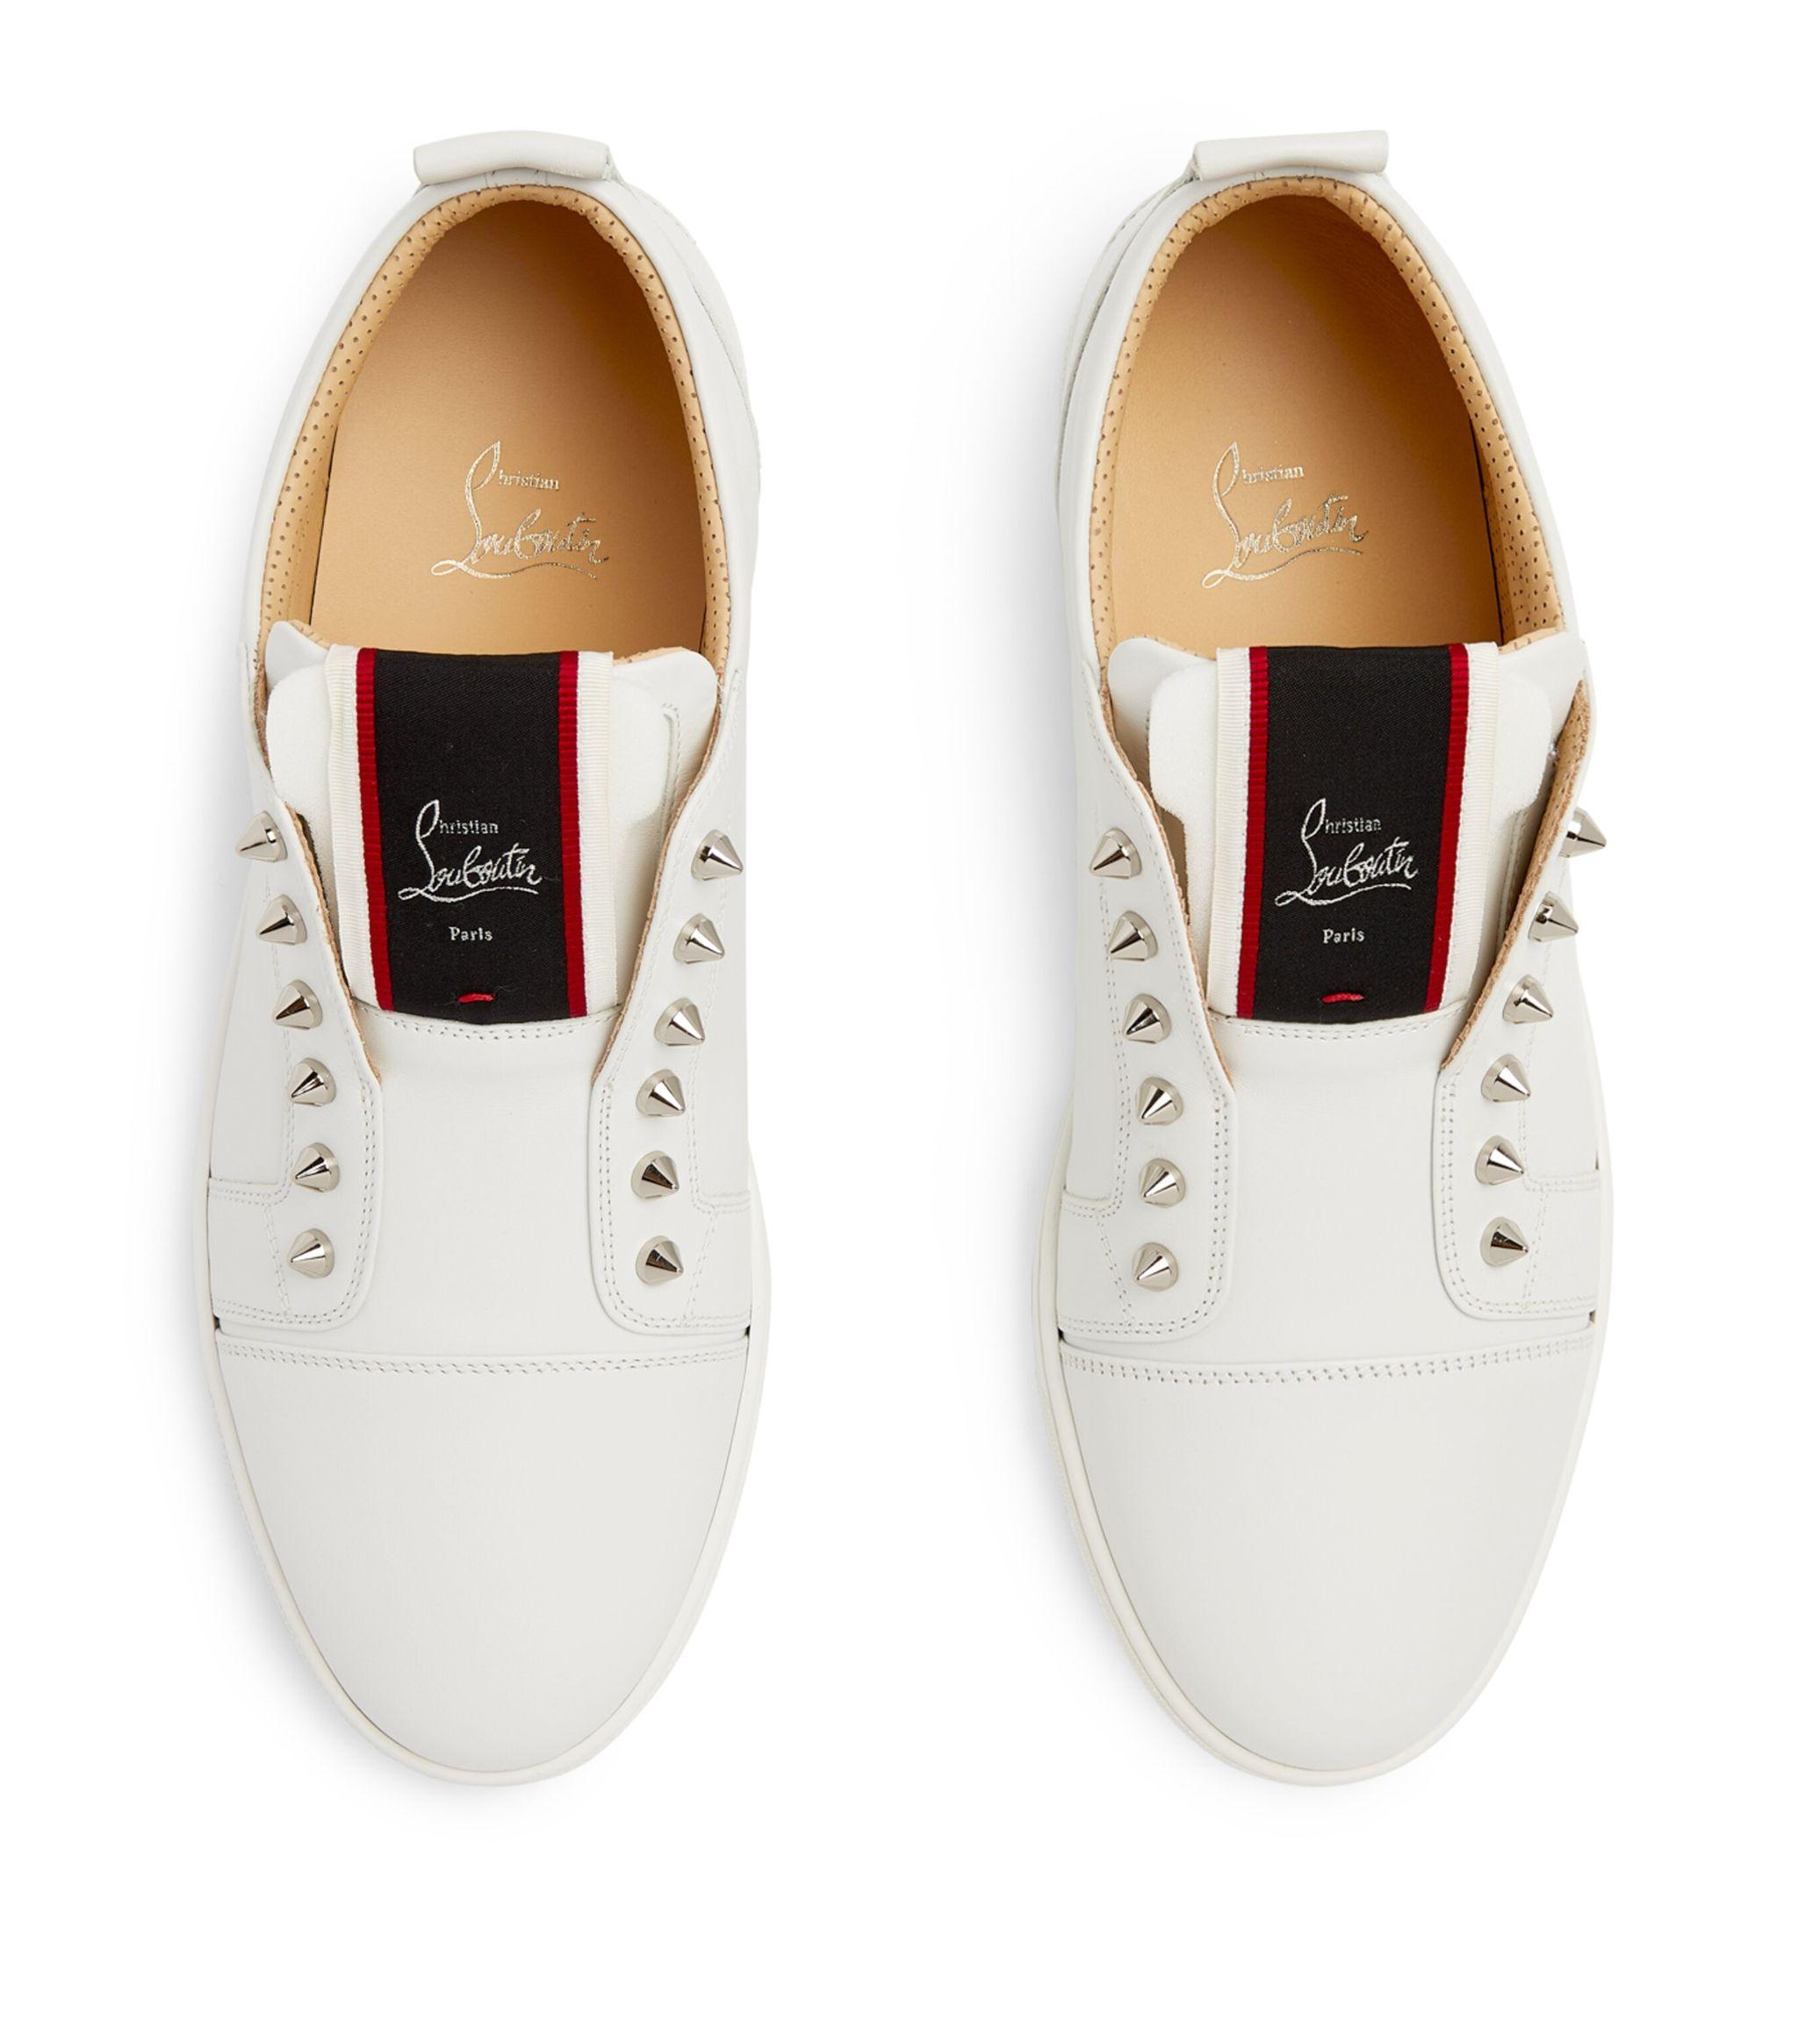 Christian Louboutin F.A.V Fique A Vontade Slip-On Sneakers - White - 43